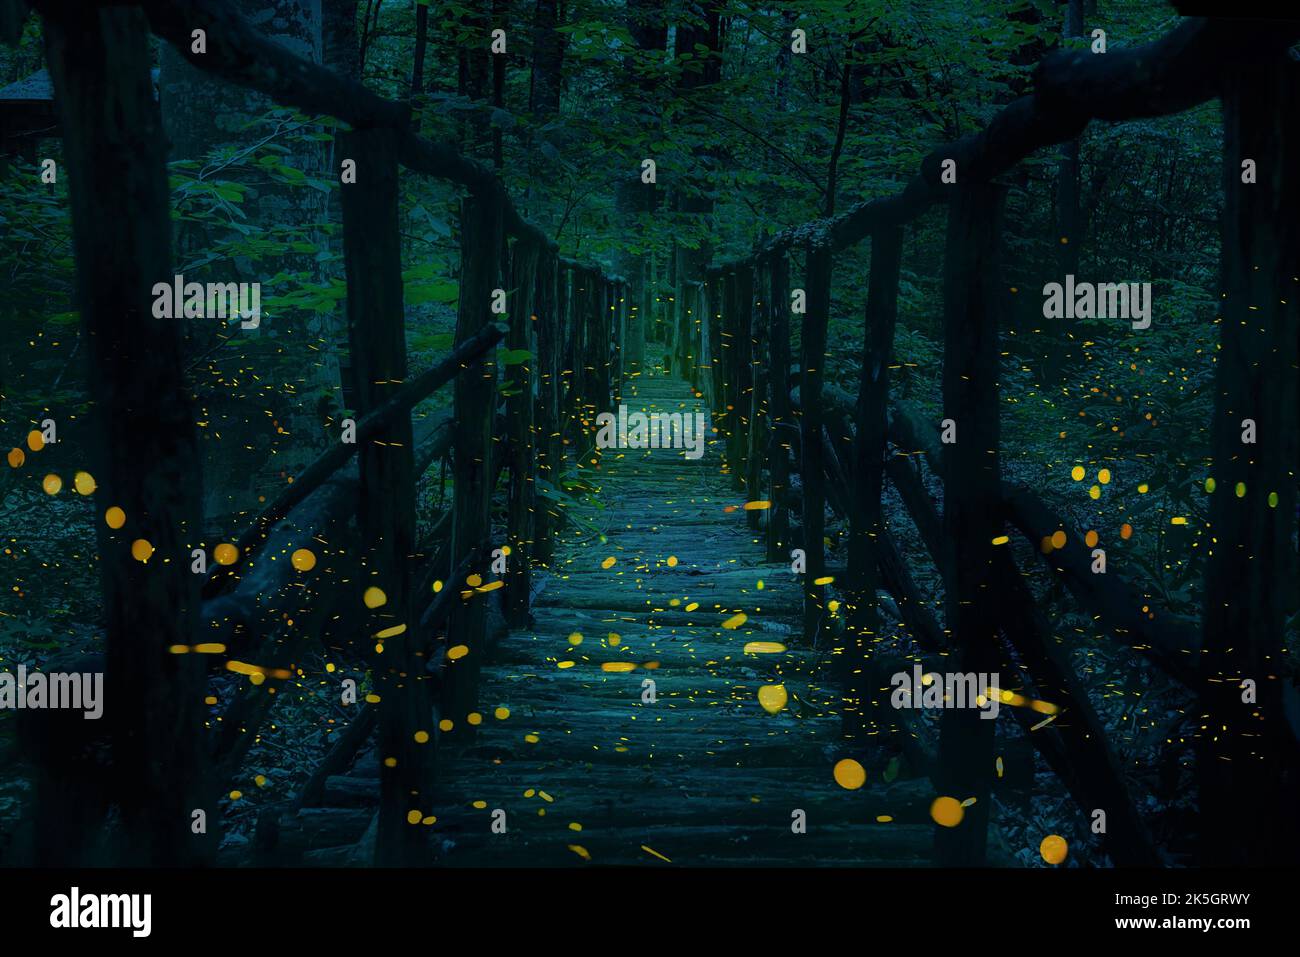 Fireflies flying over a wooden bridge in the forest at twilight. Stock Photo